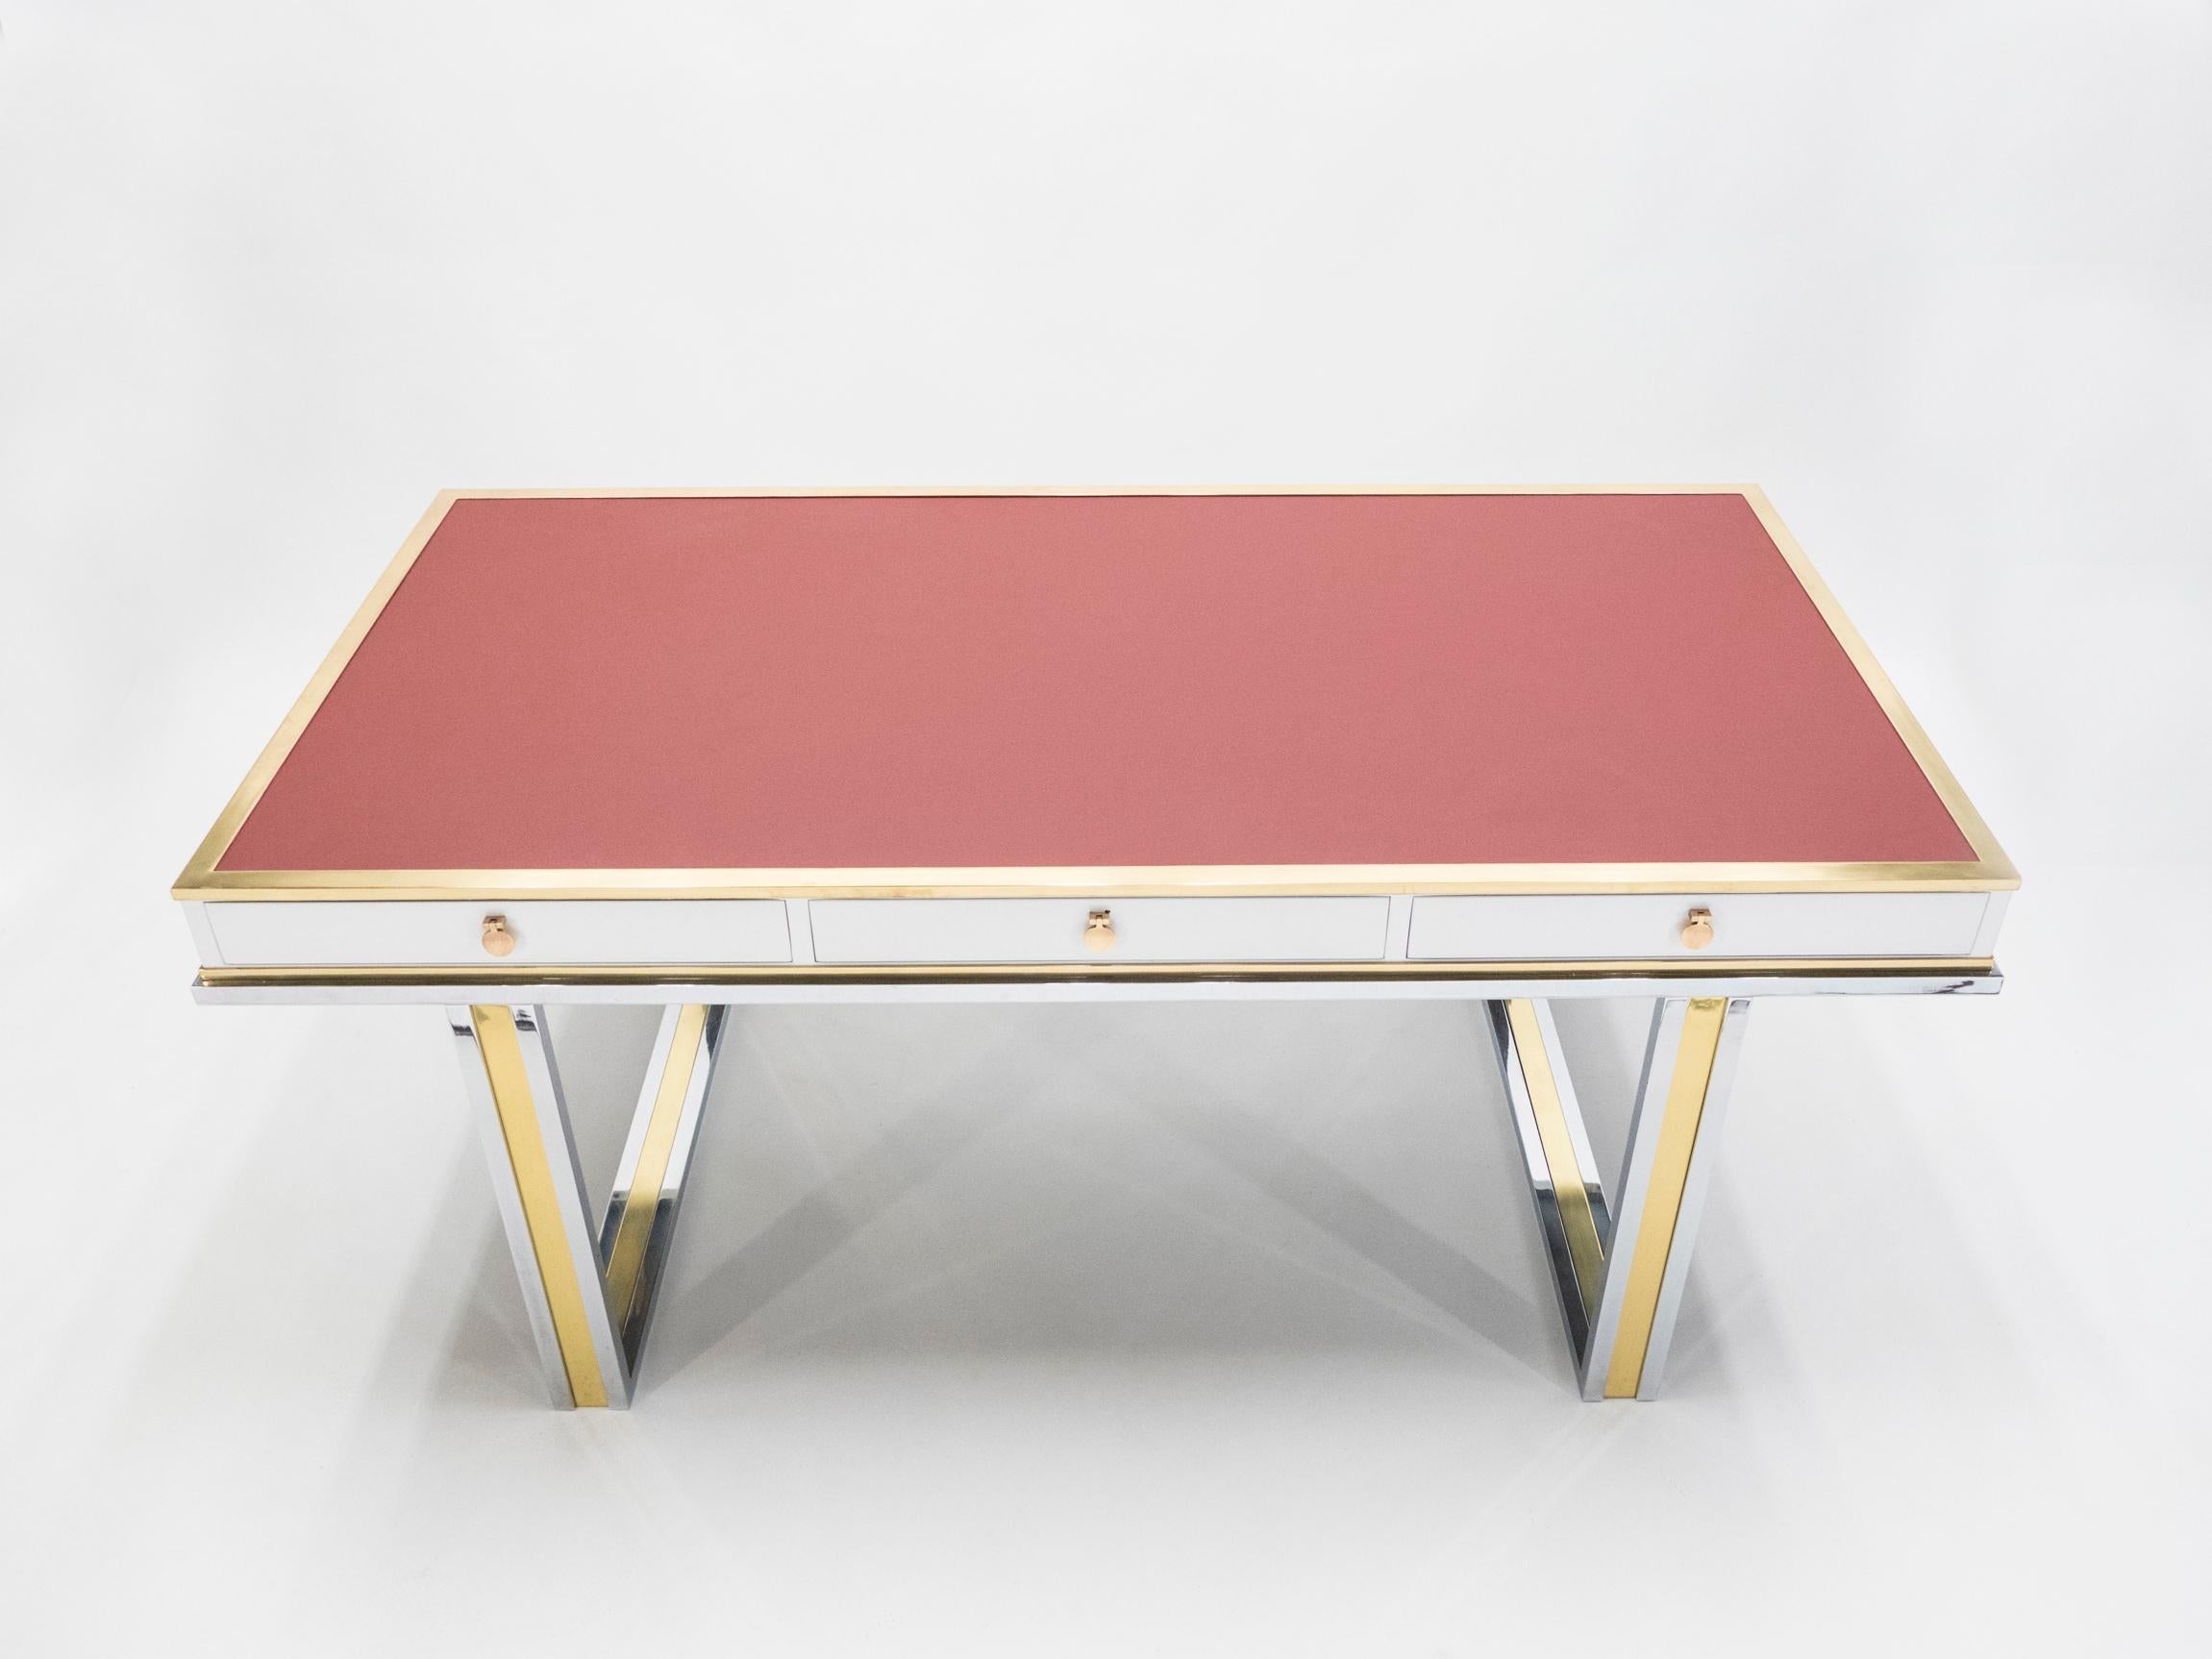 Unique French Desk White Lacquer Brass Red Leather by Atelier La Boetie, 1974 (Hollywood Regency)